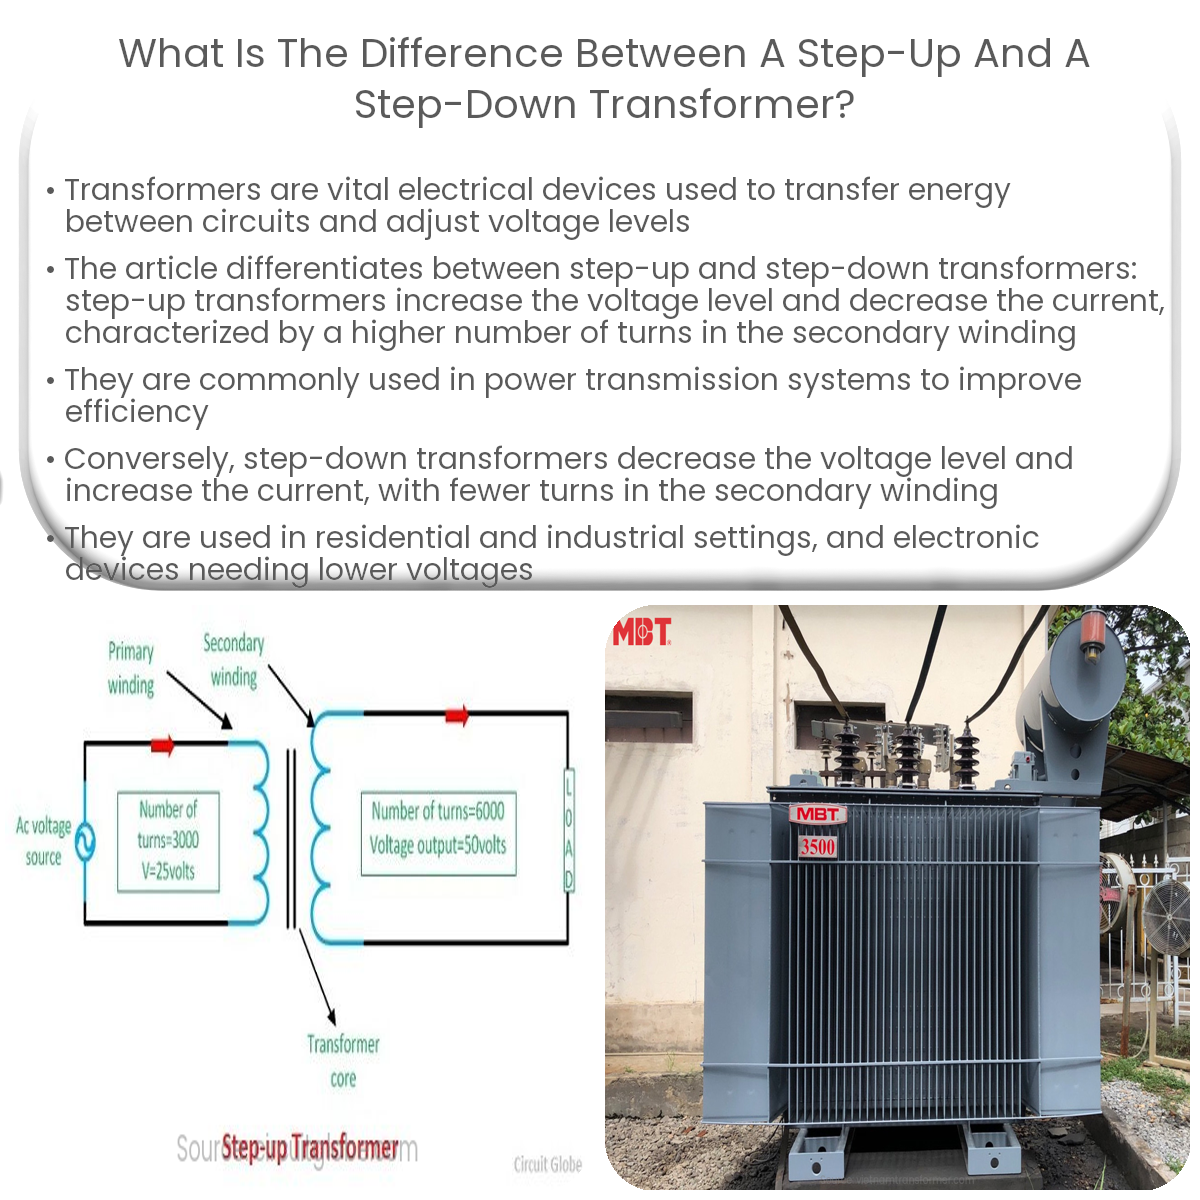 What is the difference between a step-up and a step-down transformer?